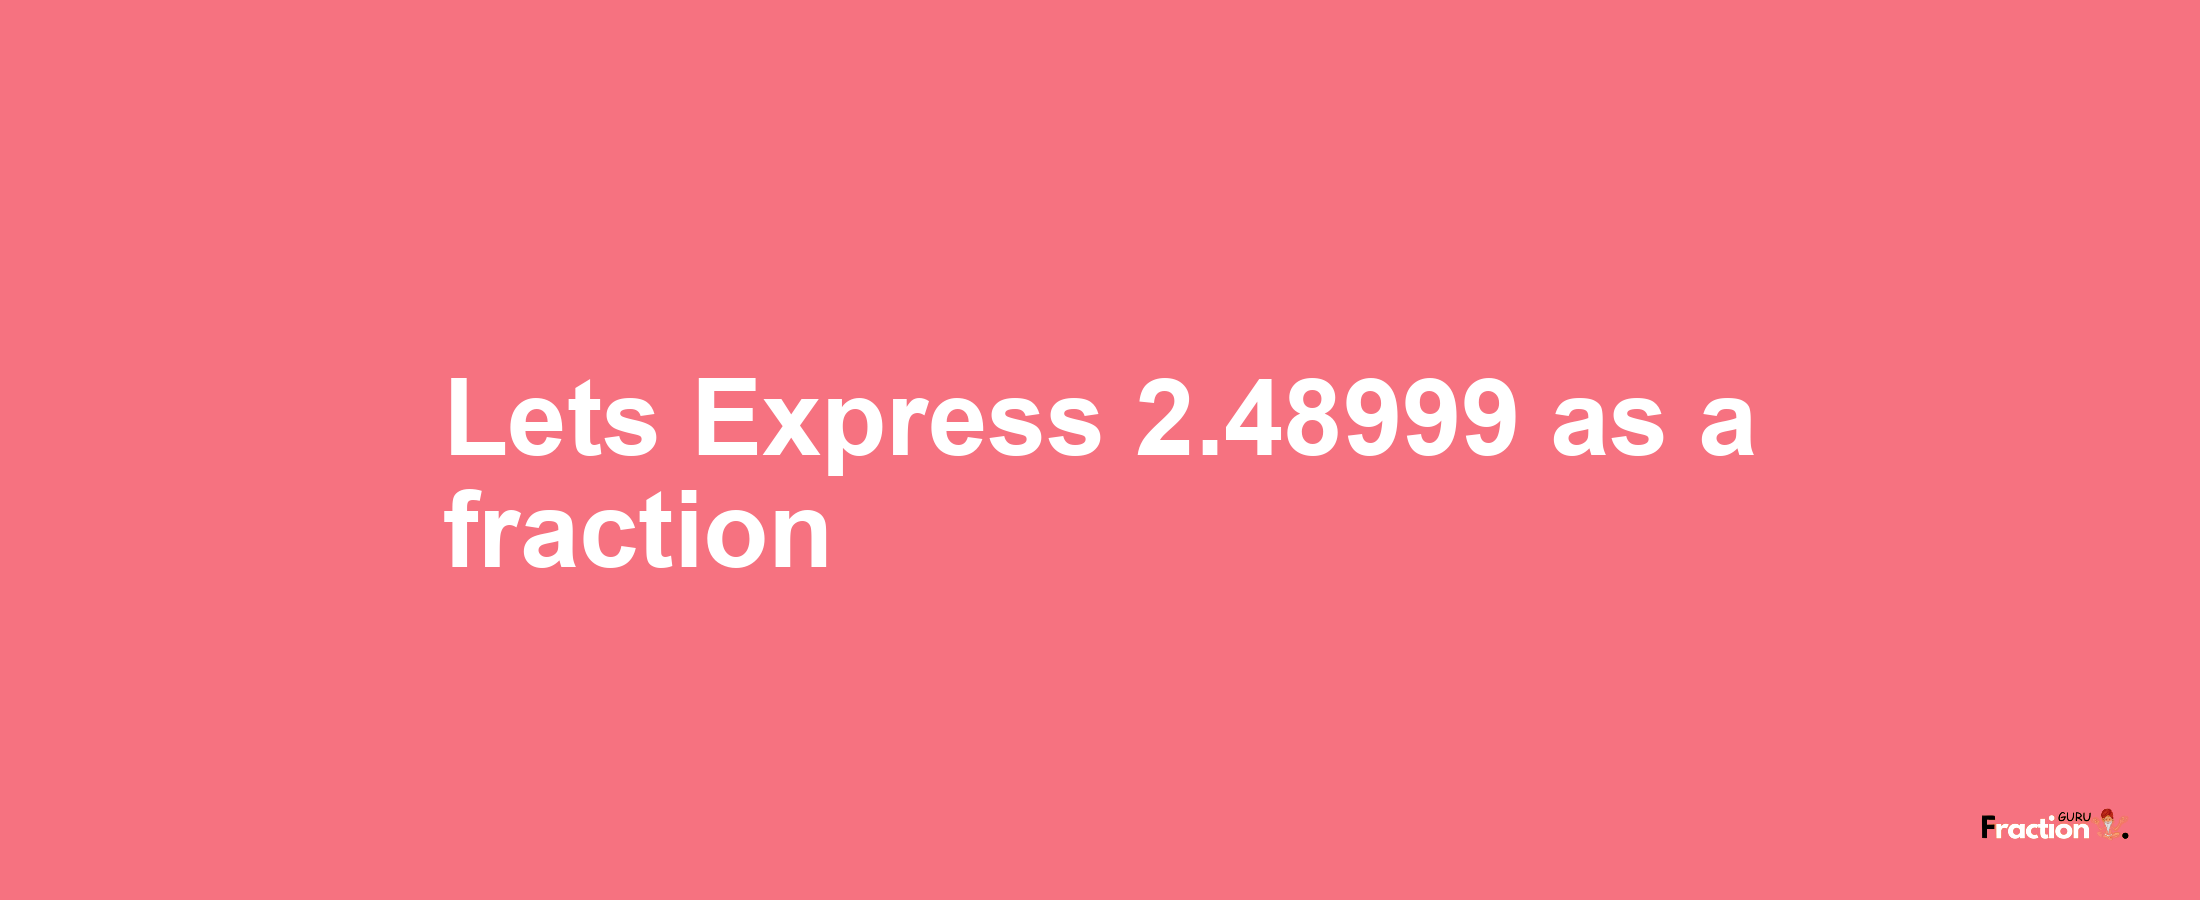 Lets Express 2.48999 as afraction